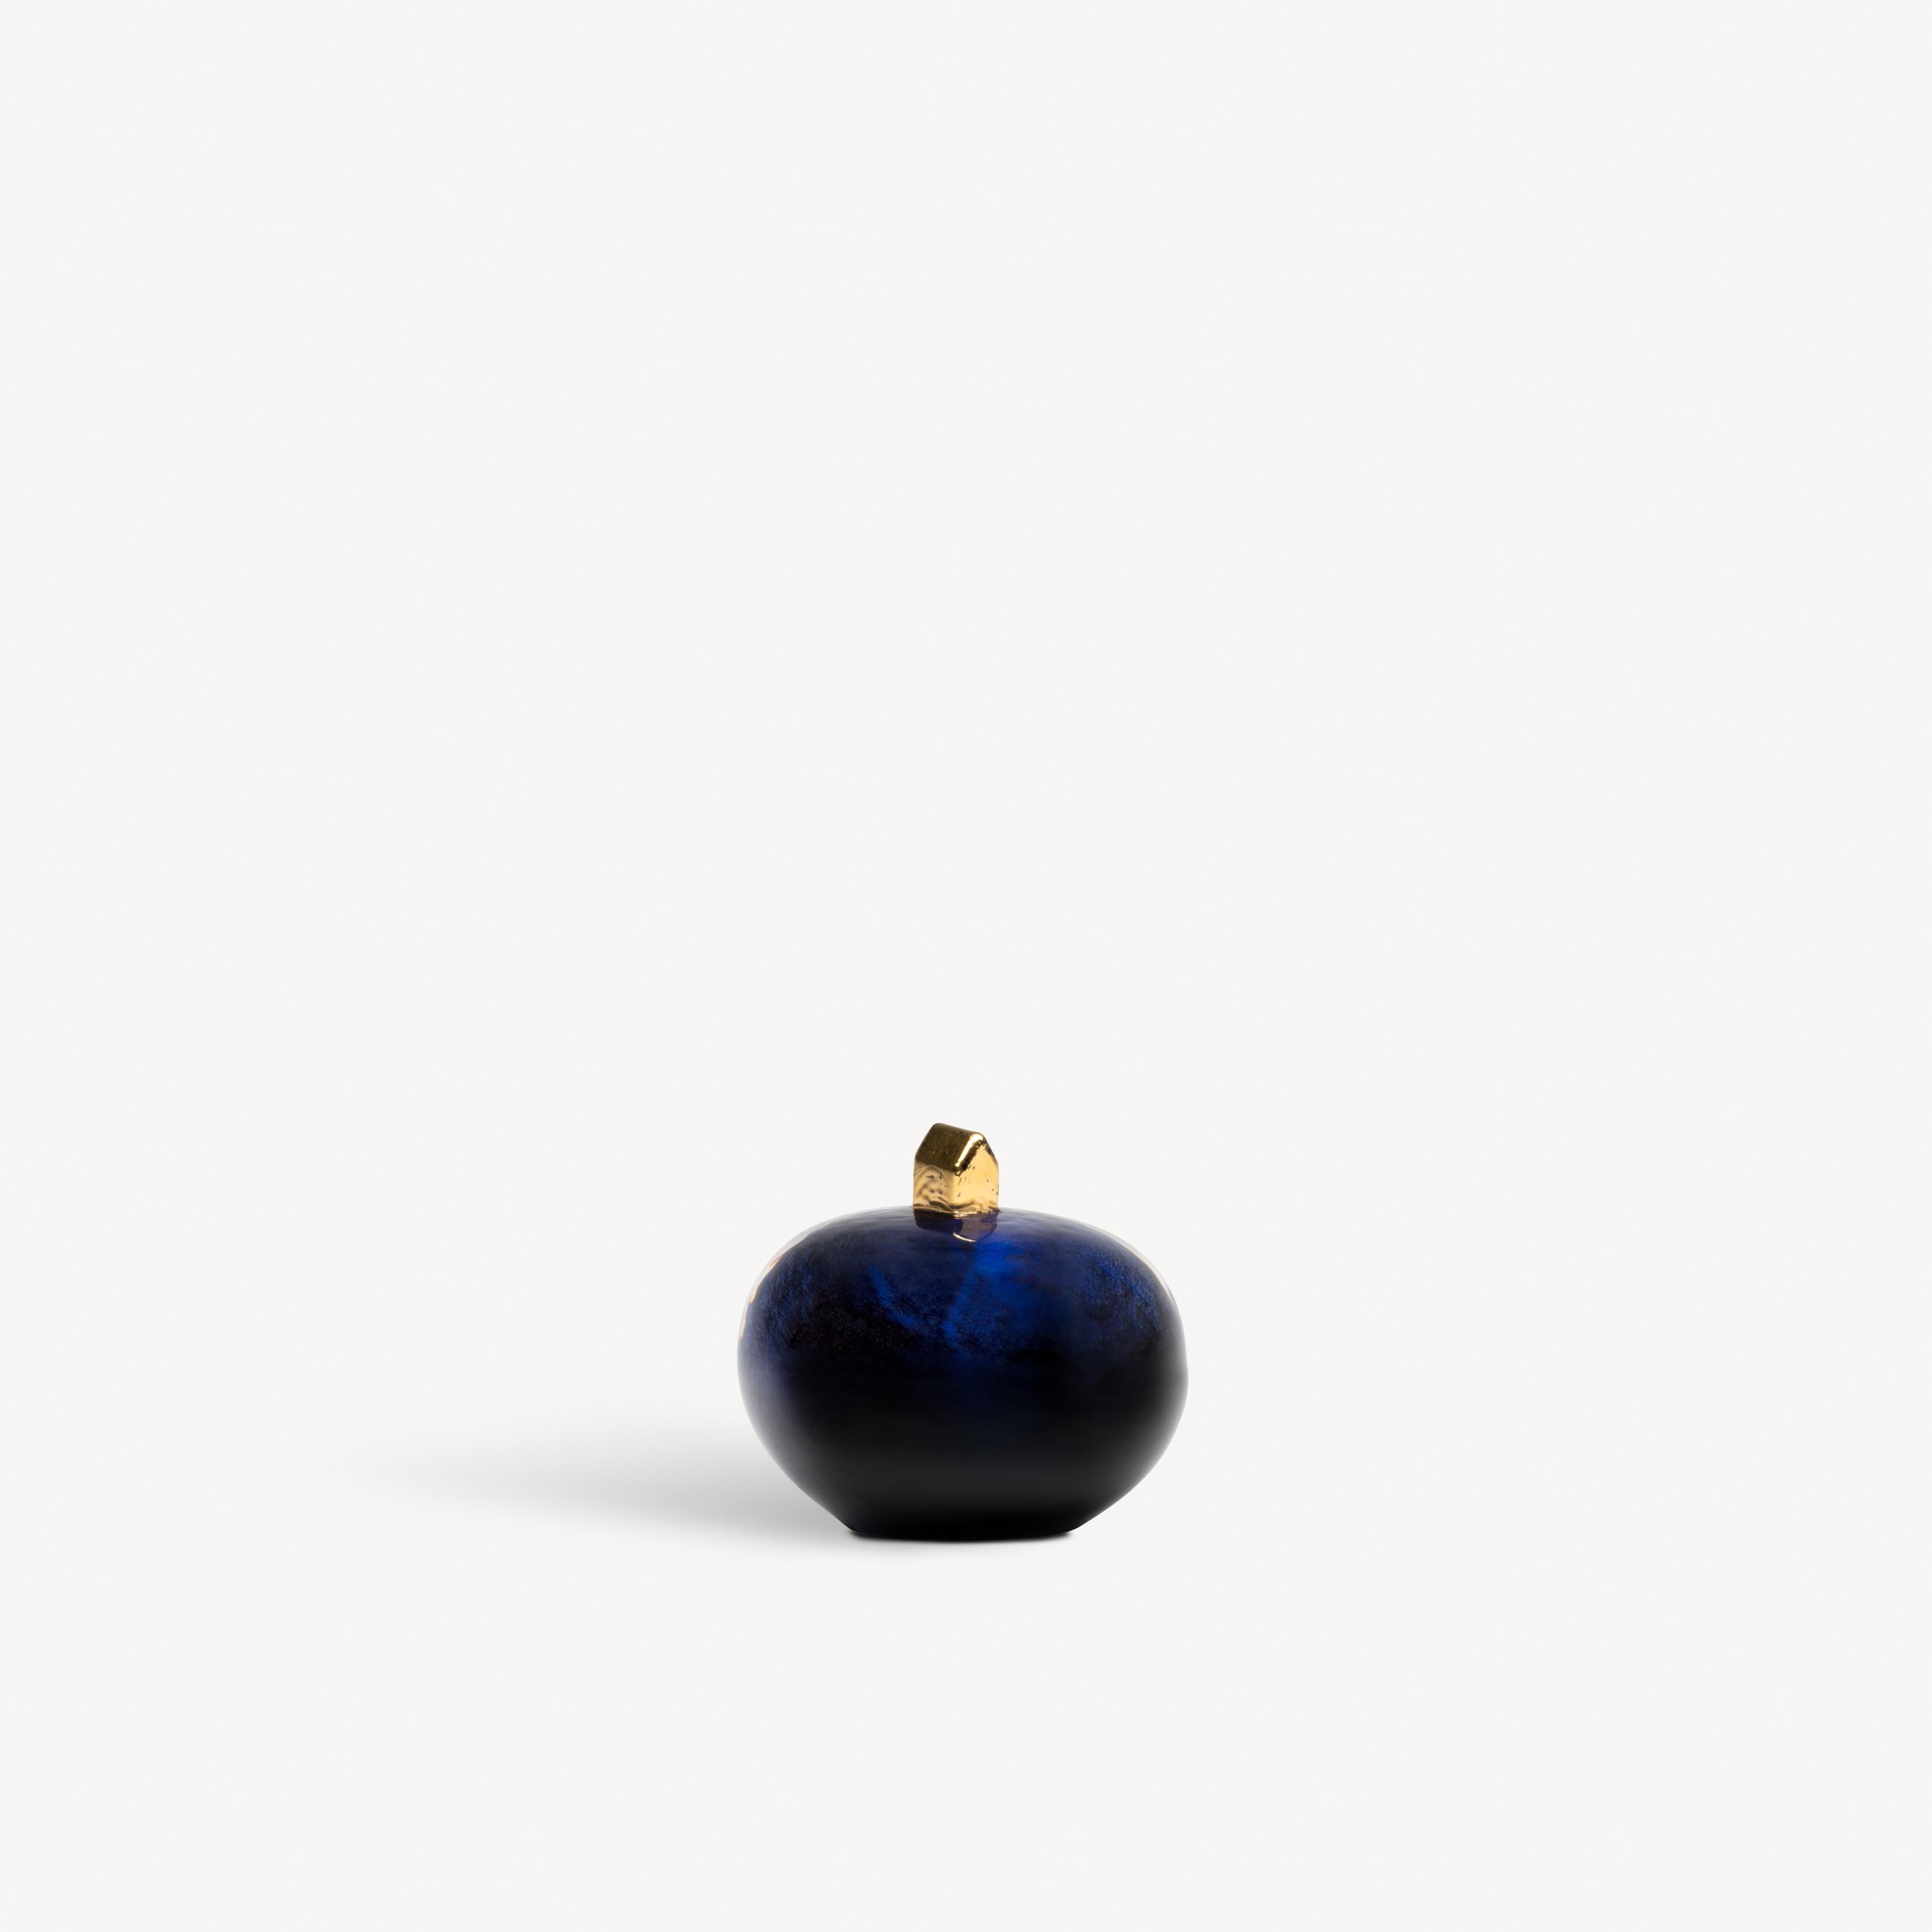 With Earth Midnight, the renowned glass artist Bertil Vallien has created a miniature world inspired by our place on the planet. The object in clear glass is colored dark blue and has a small house, hand-painted with real 21 karat gold, at the top.